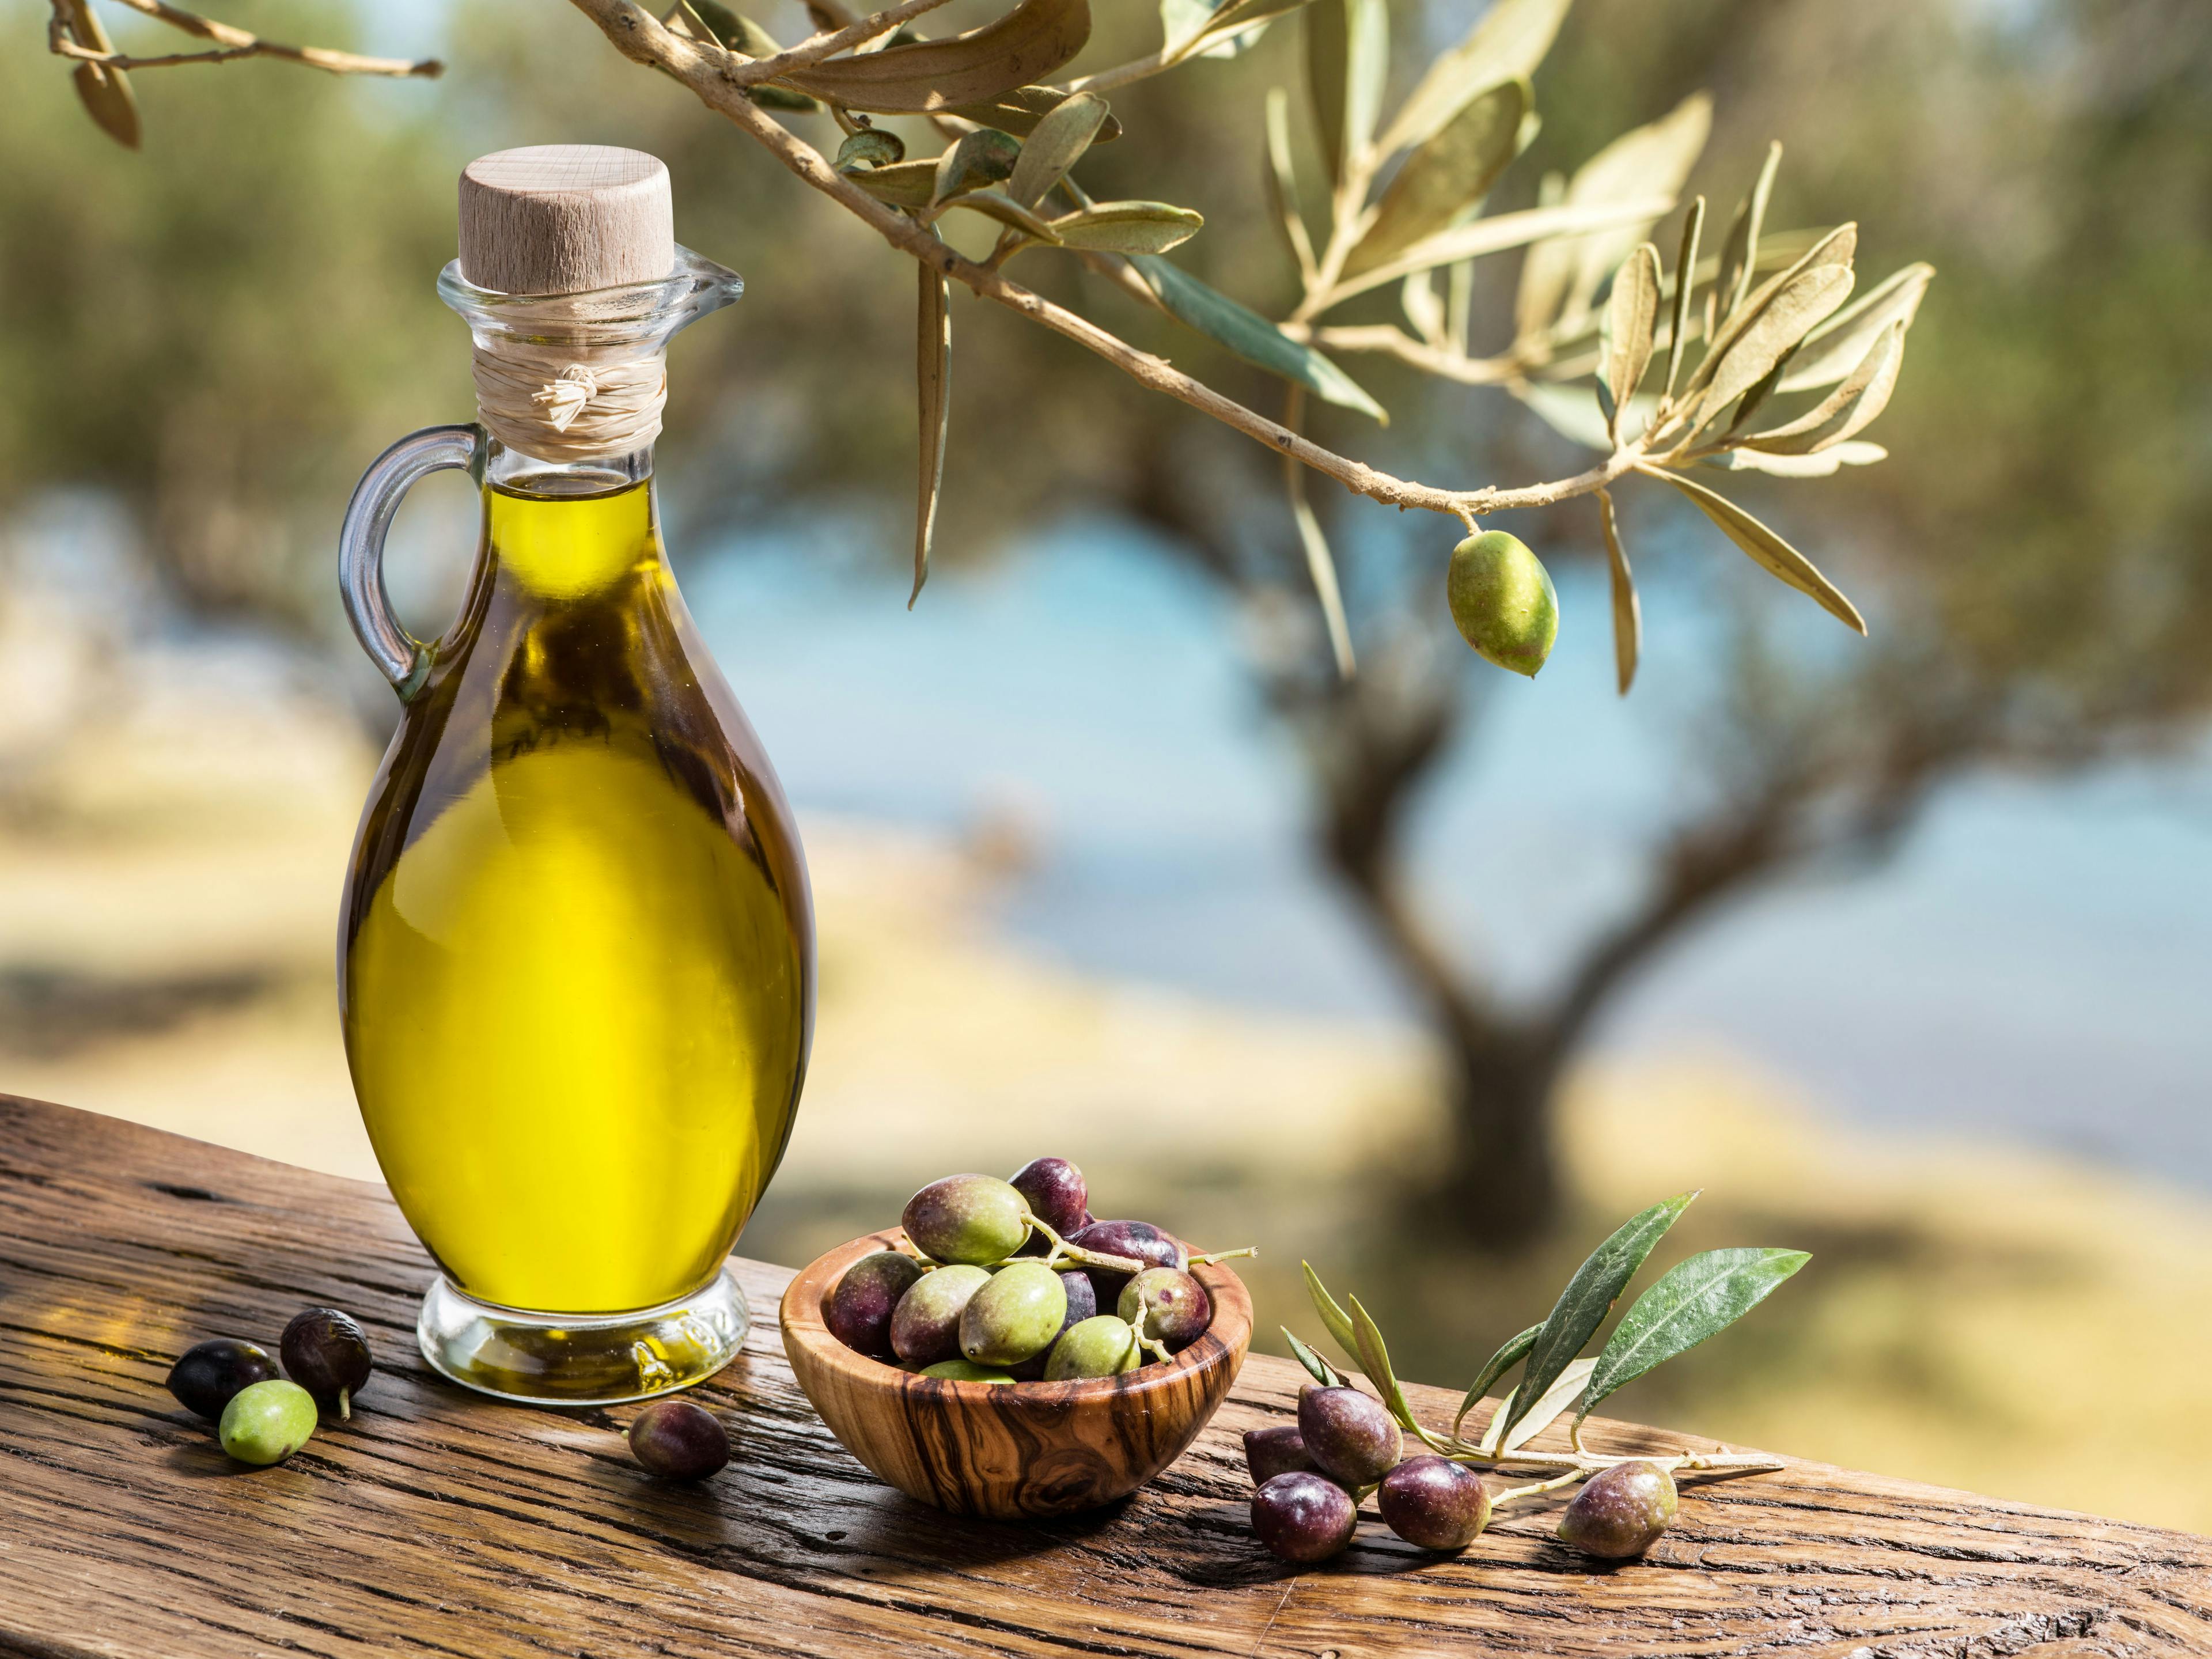 Olive oil and berries are on the wooden table under the olive tr | Image Credit: © volff - stock.adobe.com.